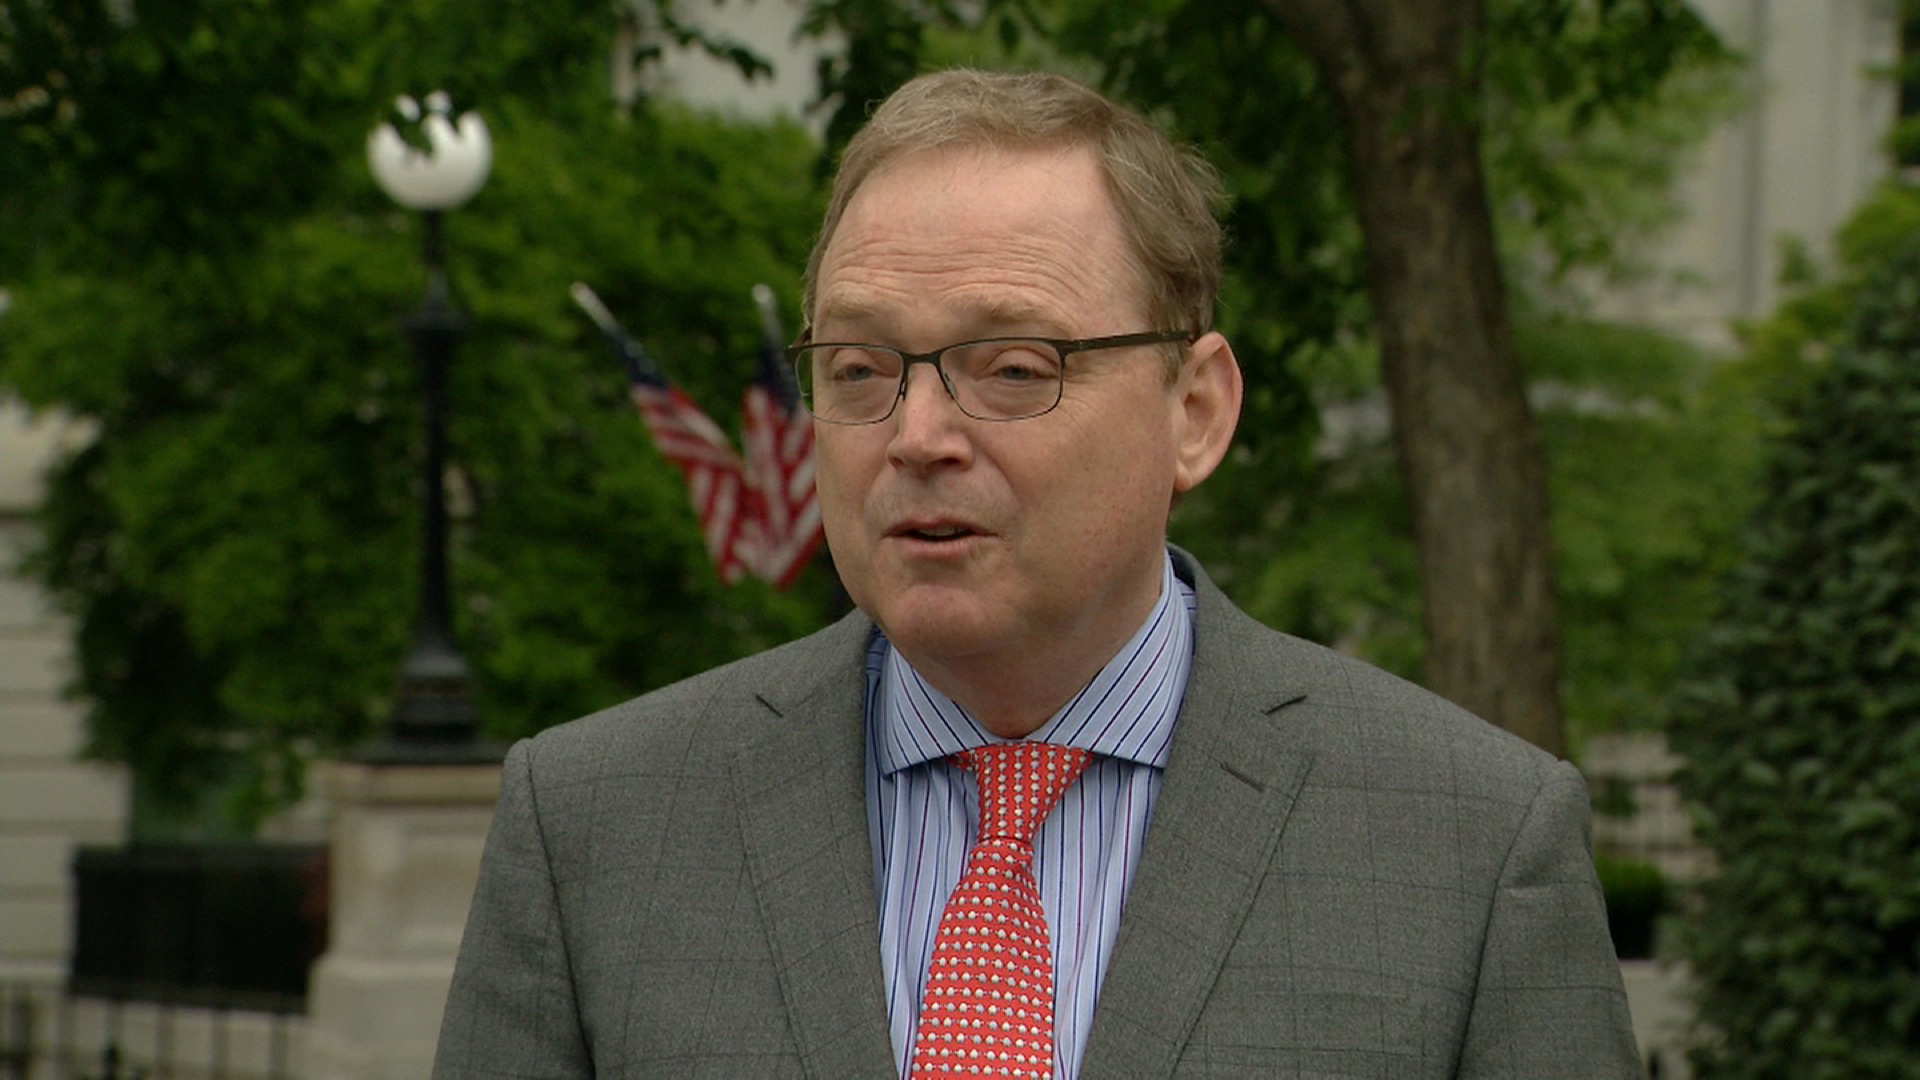 Kevin Hassett, White House economic adviser, speaks to reporters outside of the White House on May 14 in Washington.